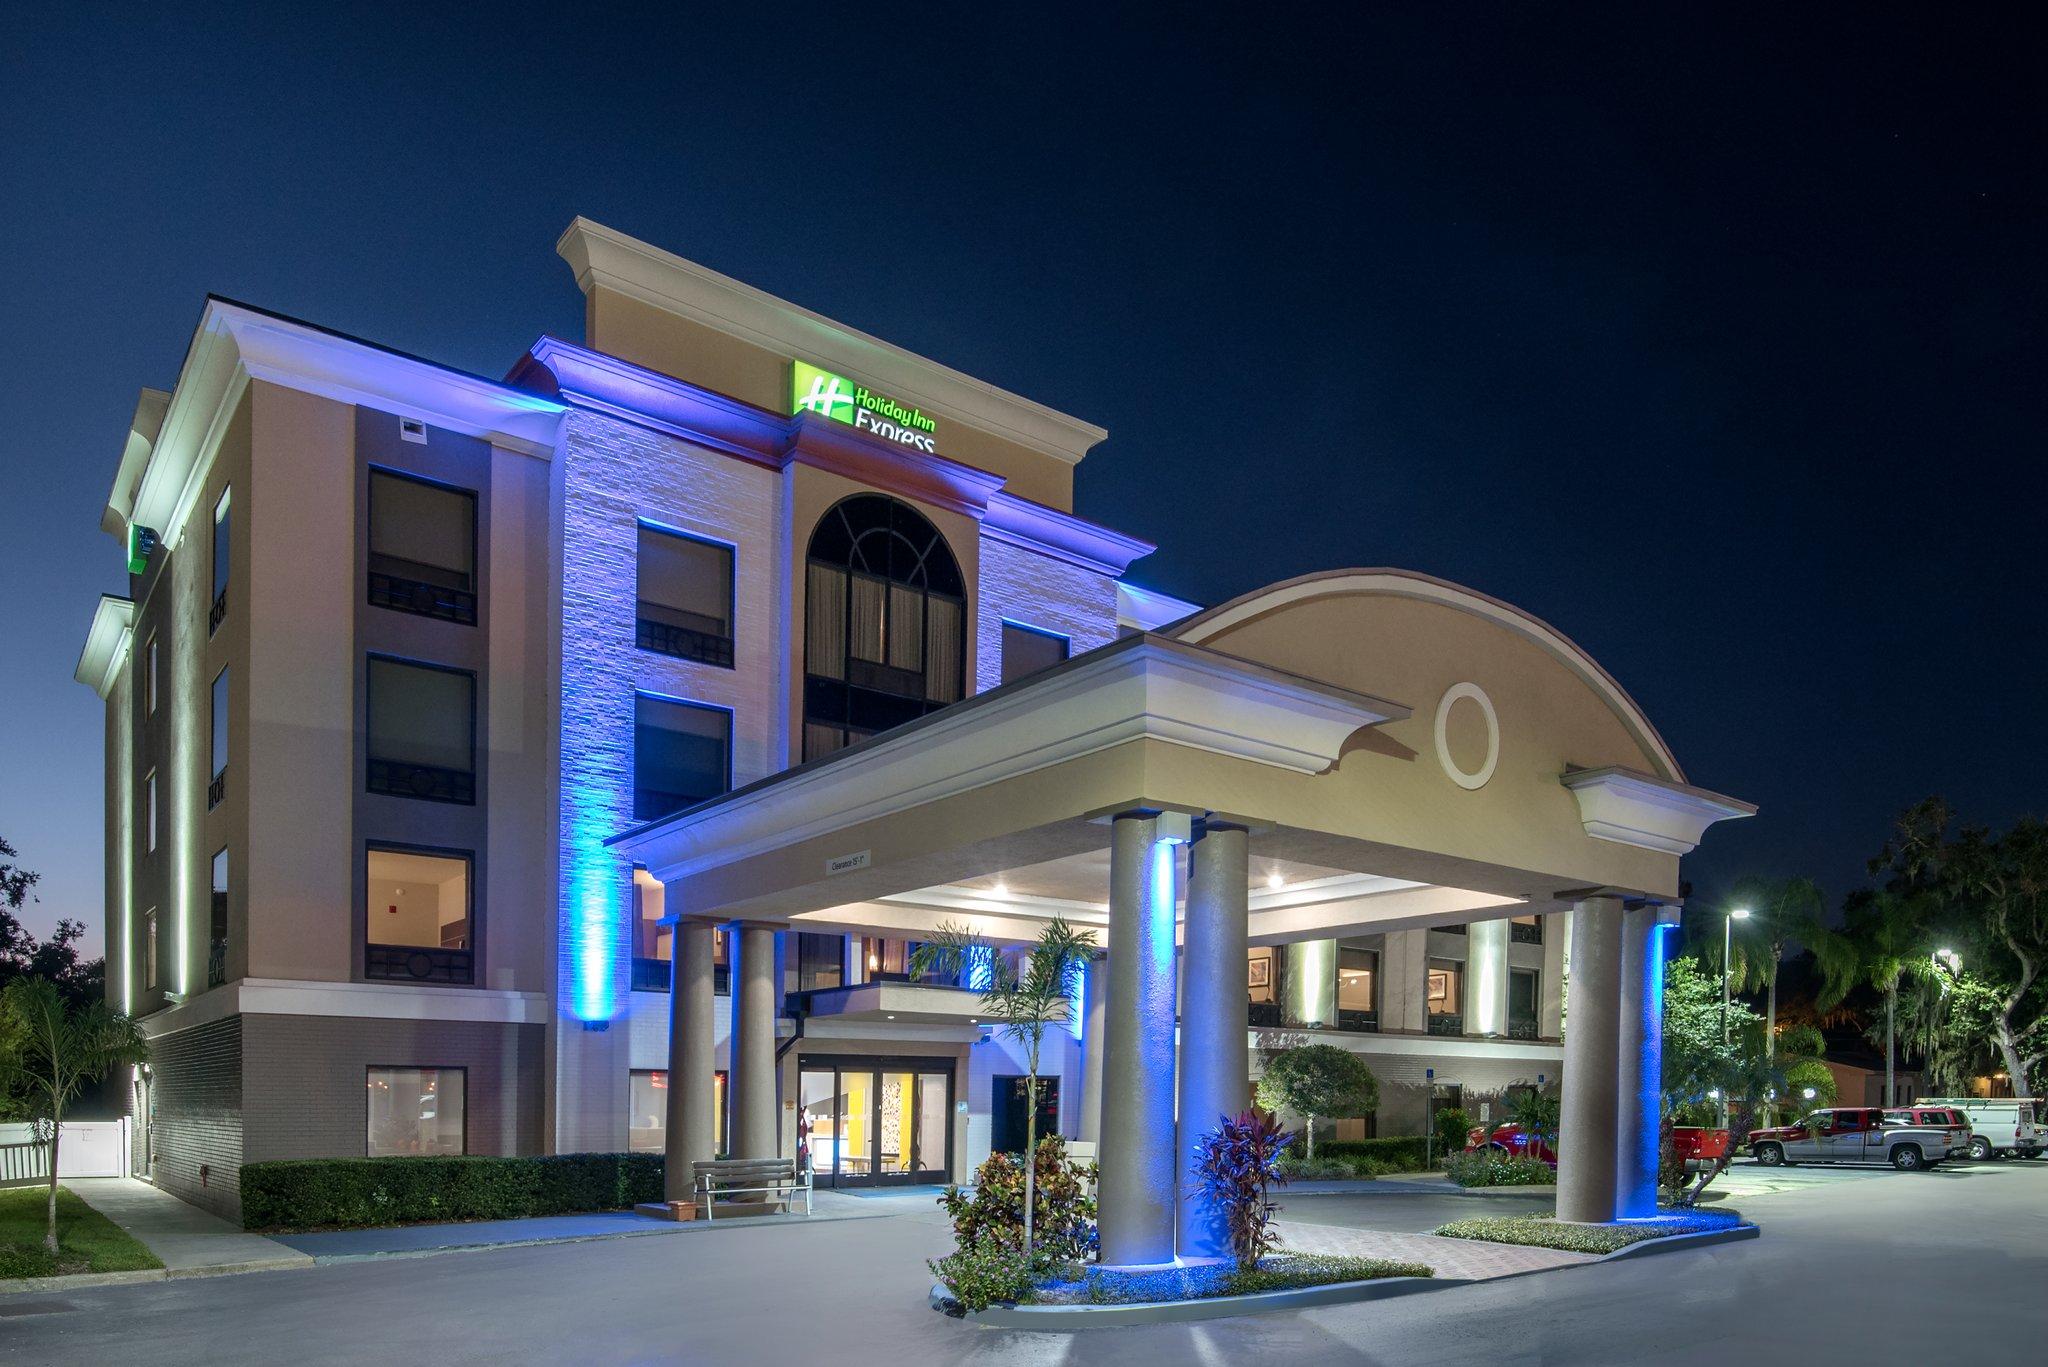 Holiday Inn Express Hotel & Suites Bartow in Bartow, FL